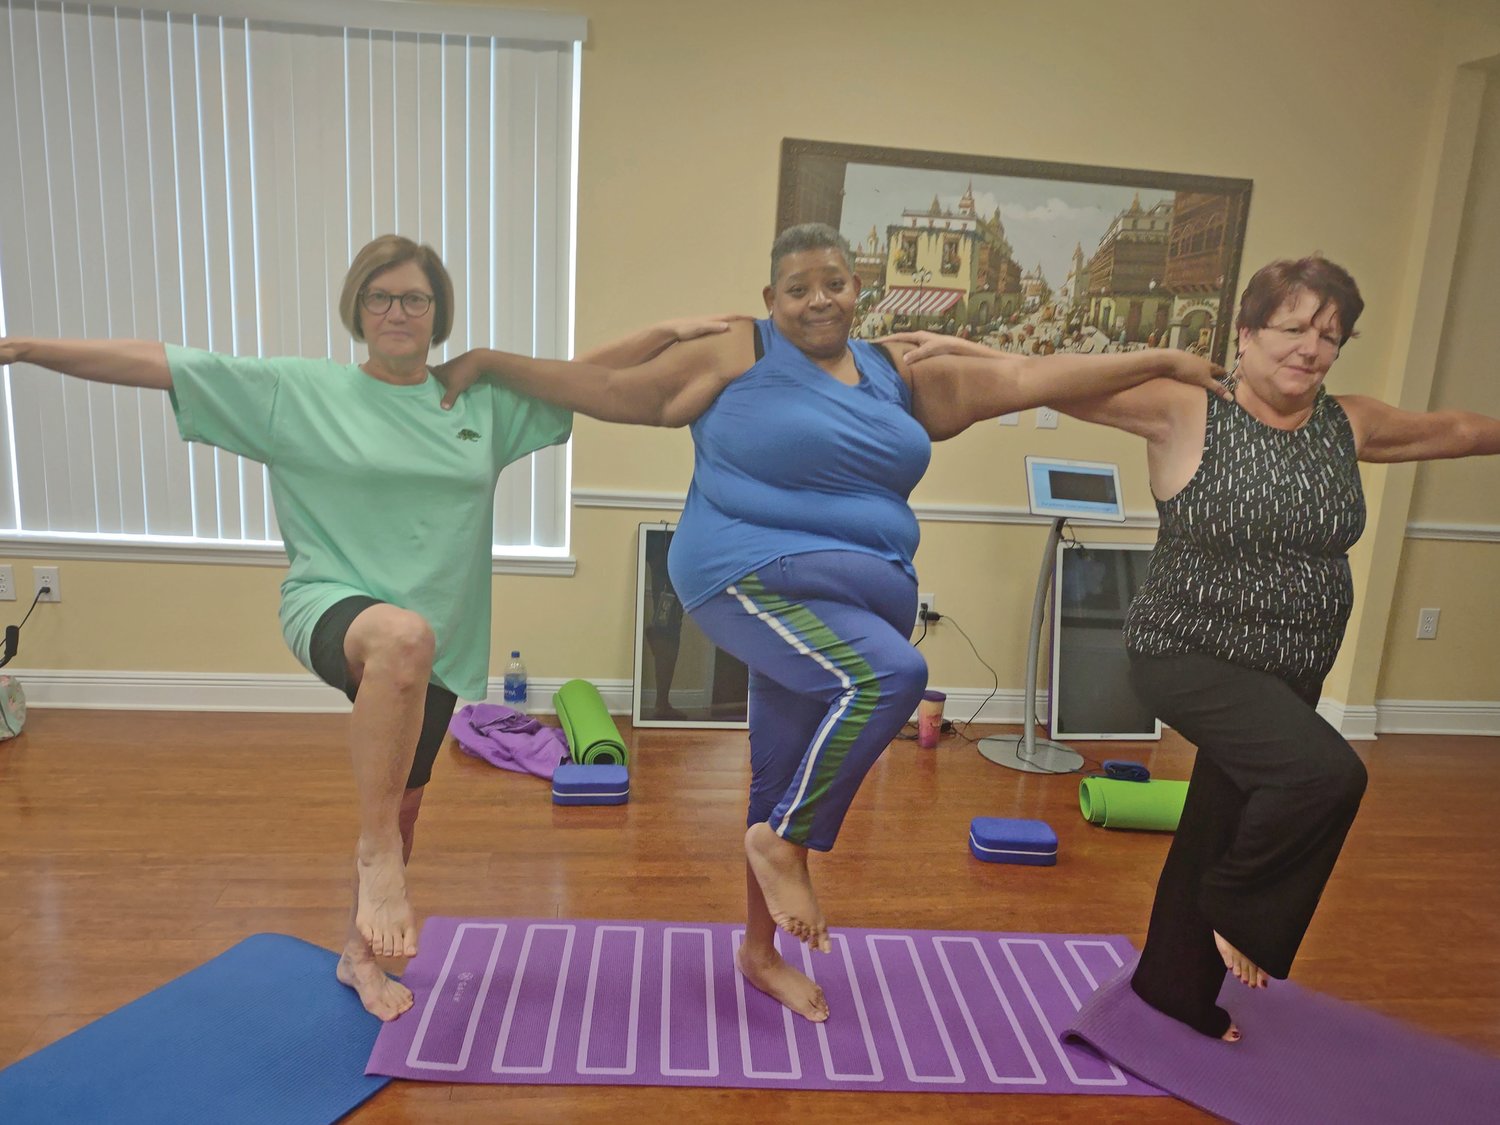 Bette Sayers, Leslie Wade and Cynthia Buckwalter are very determined practioners dedicated to executing the yoga postures to improve balance. To execute this pose with others, the mind must be completely focused to maintain physical support with other students.